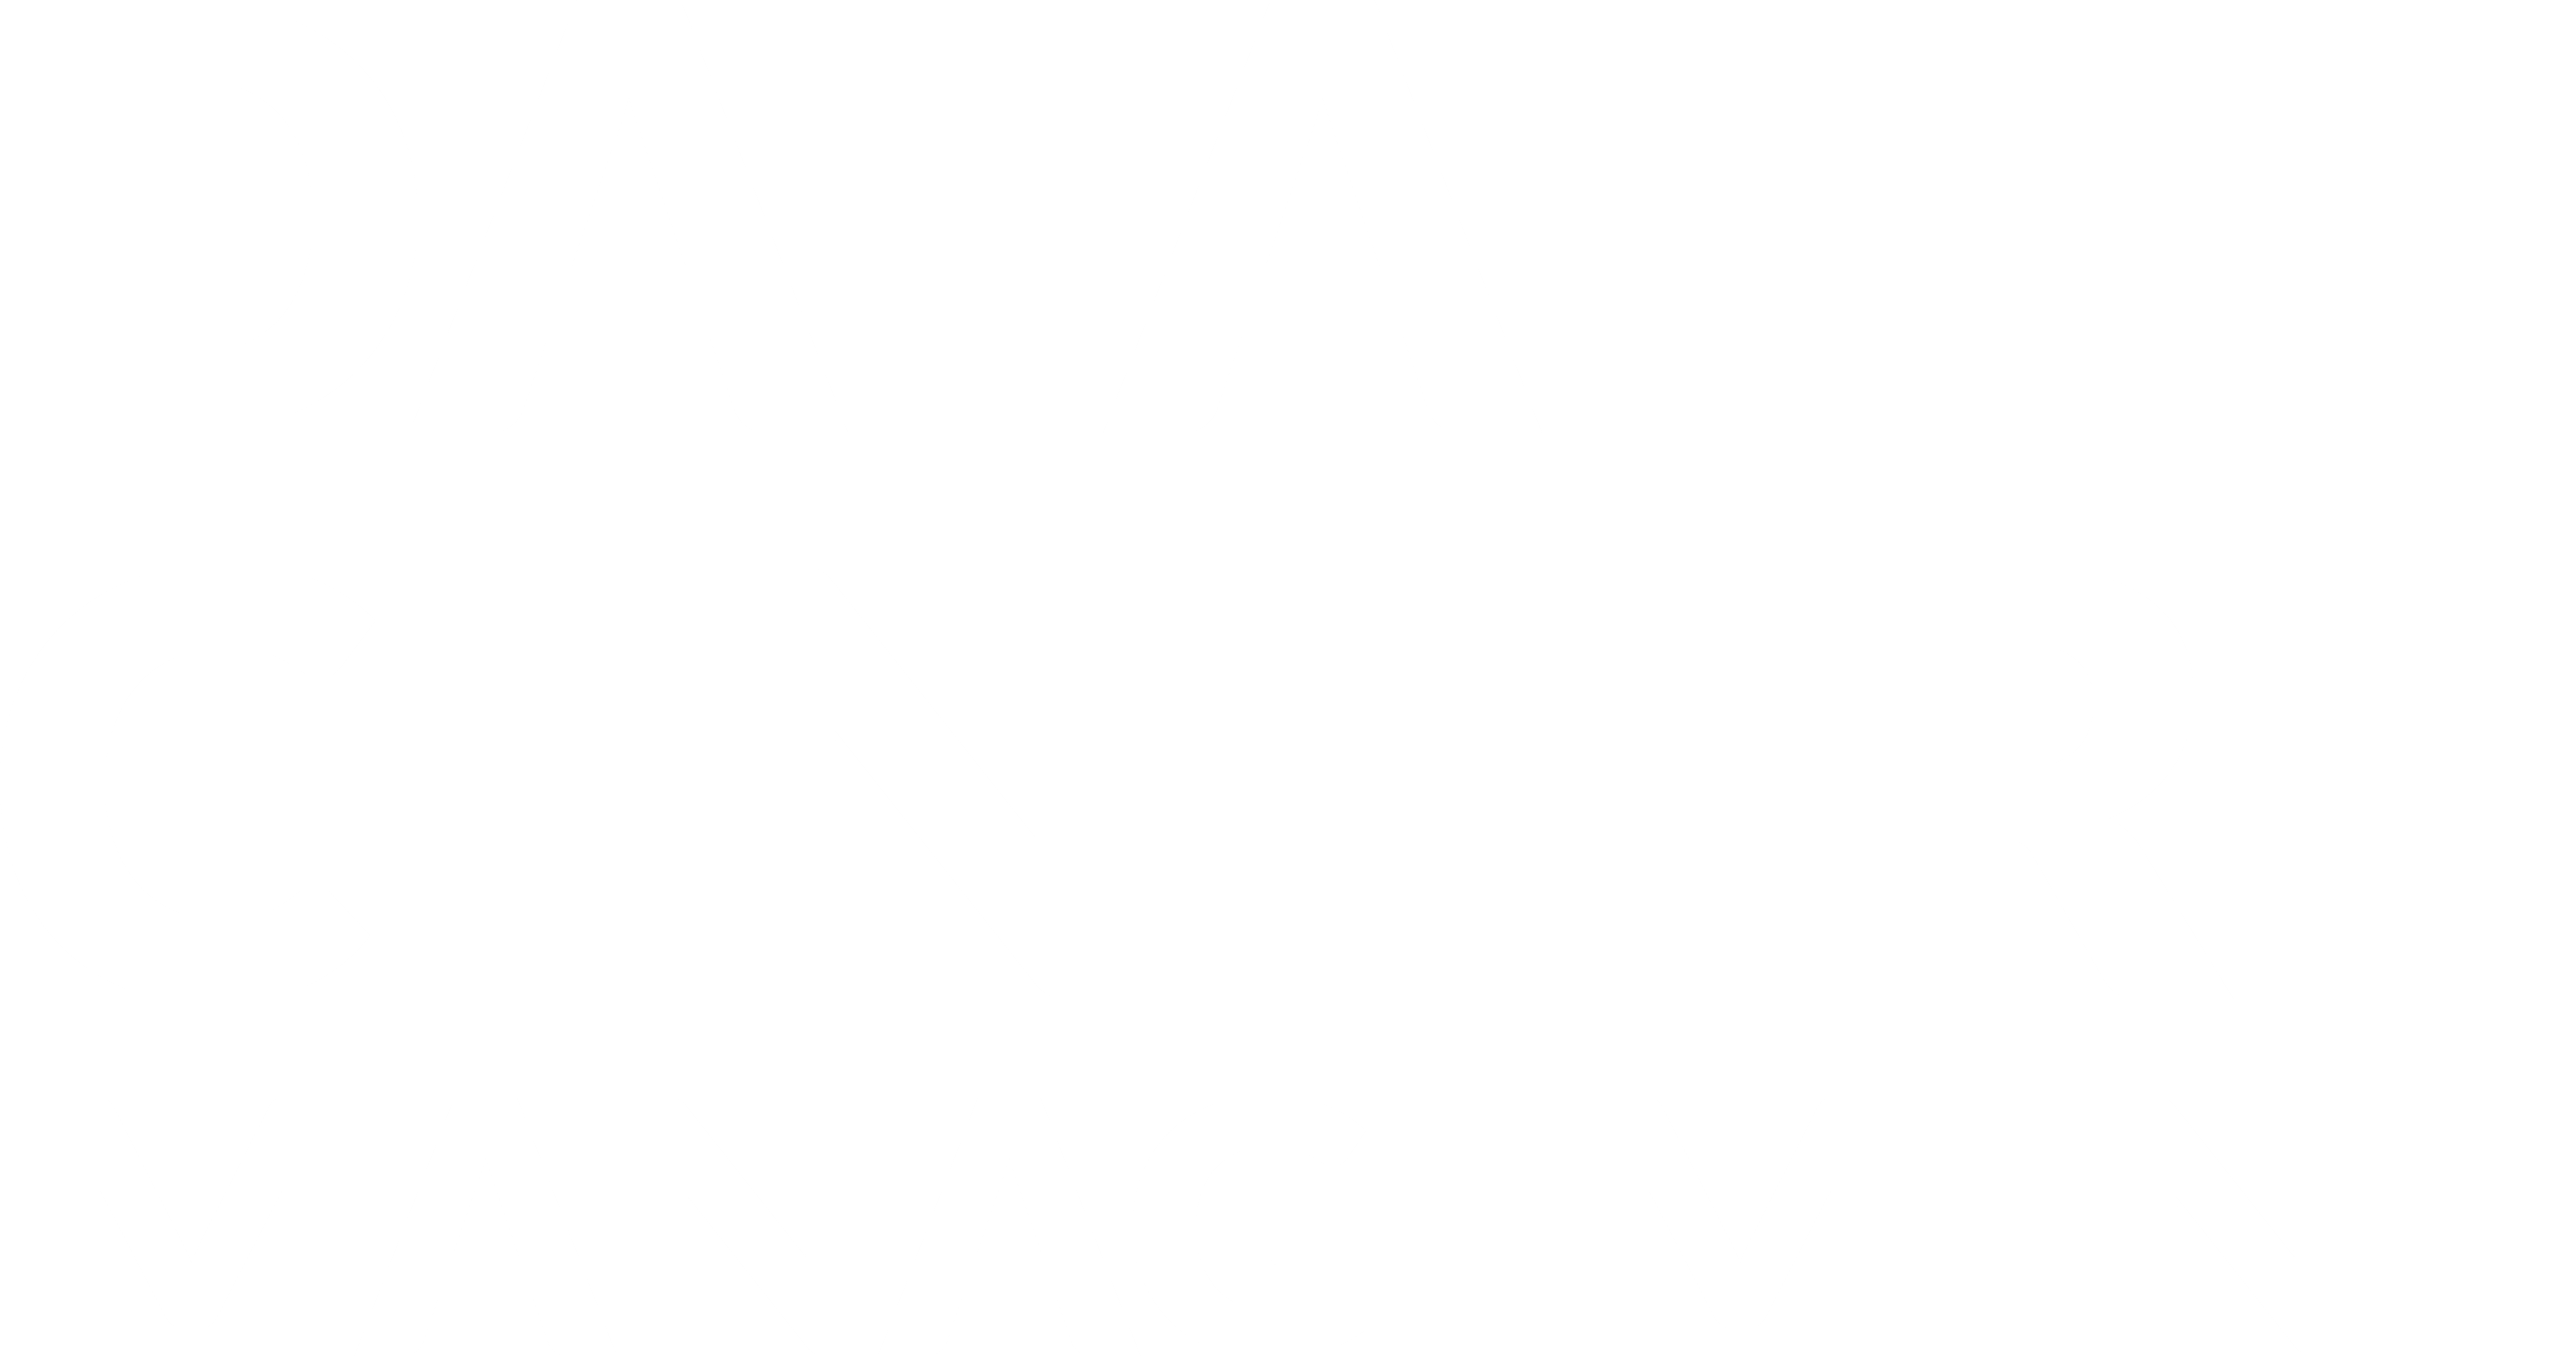 text-image with a bold text showing 'DATA CENTER' 